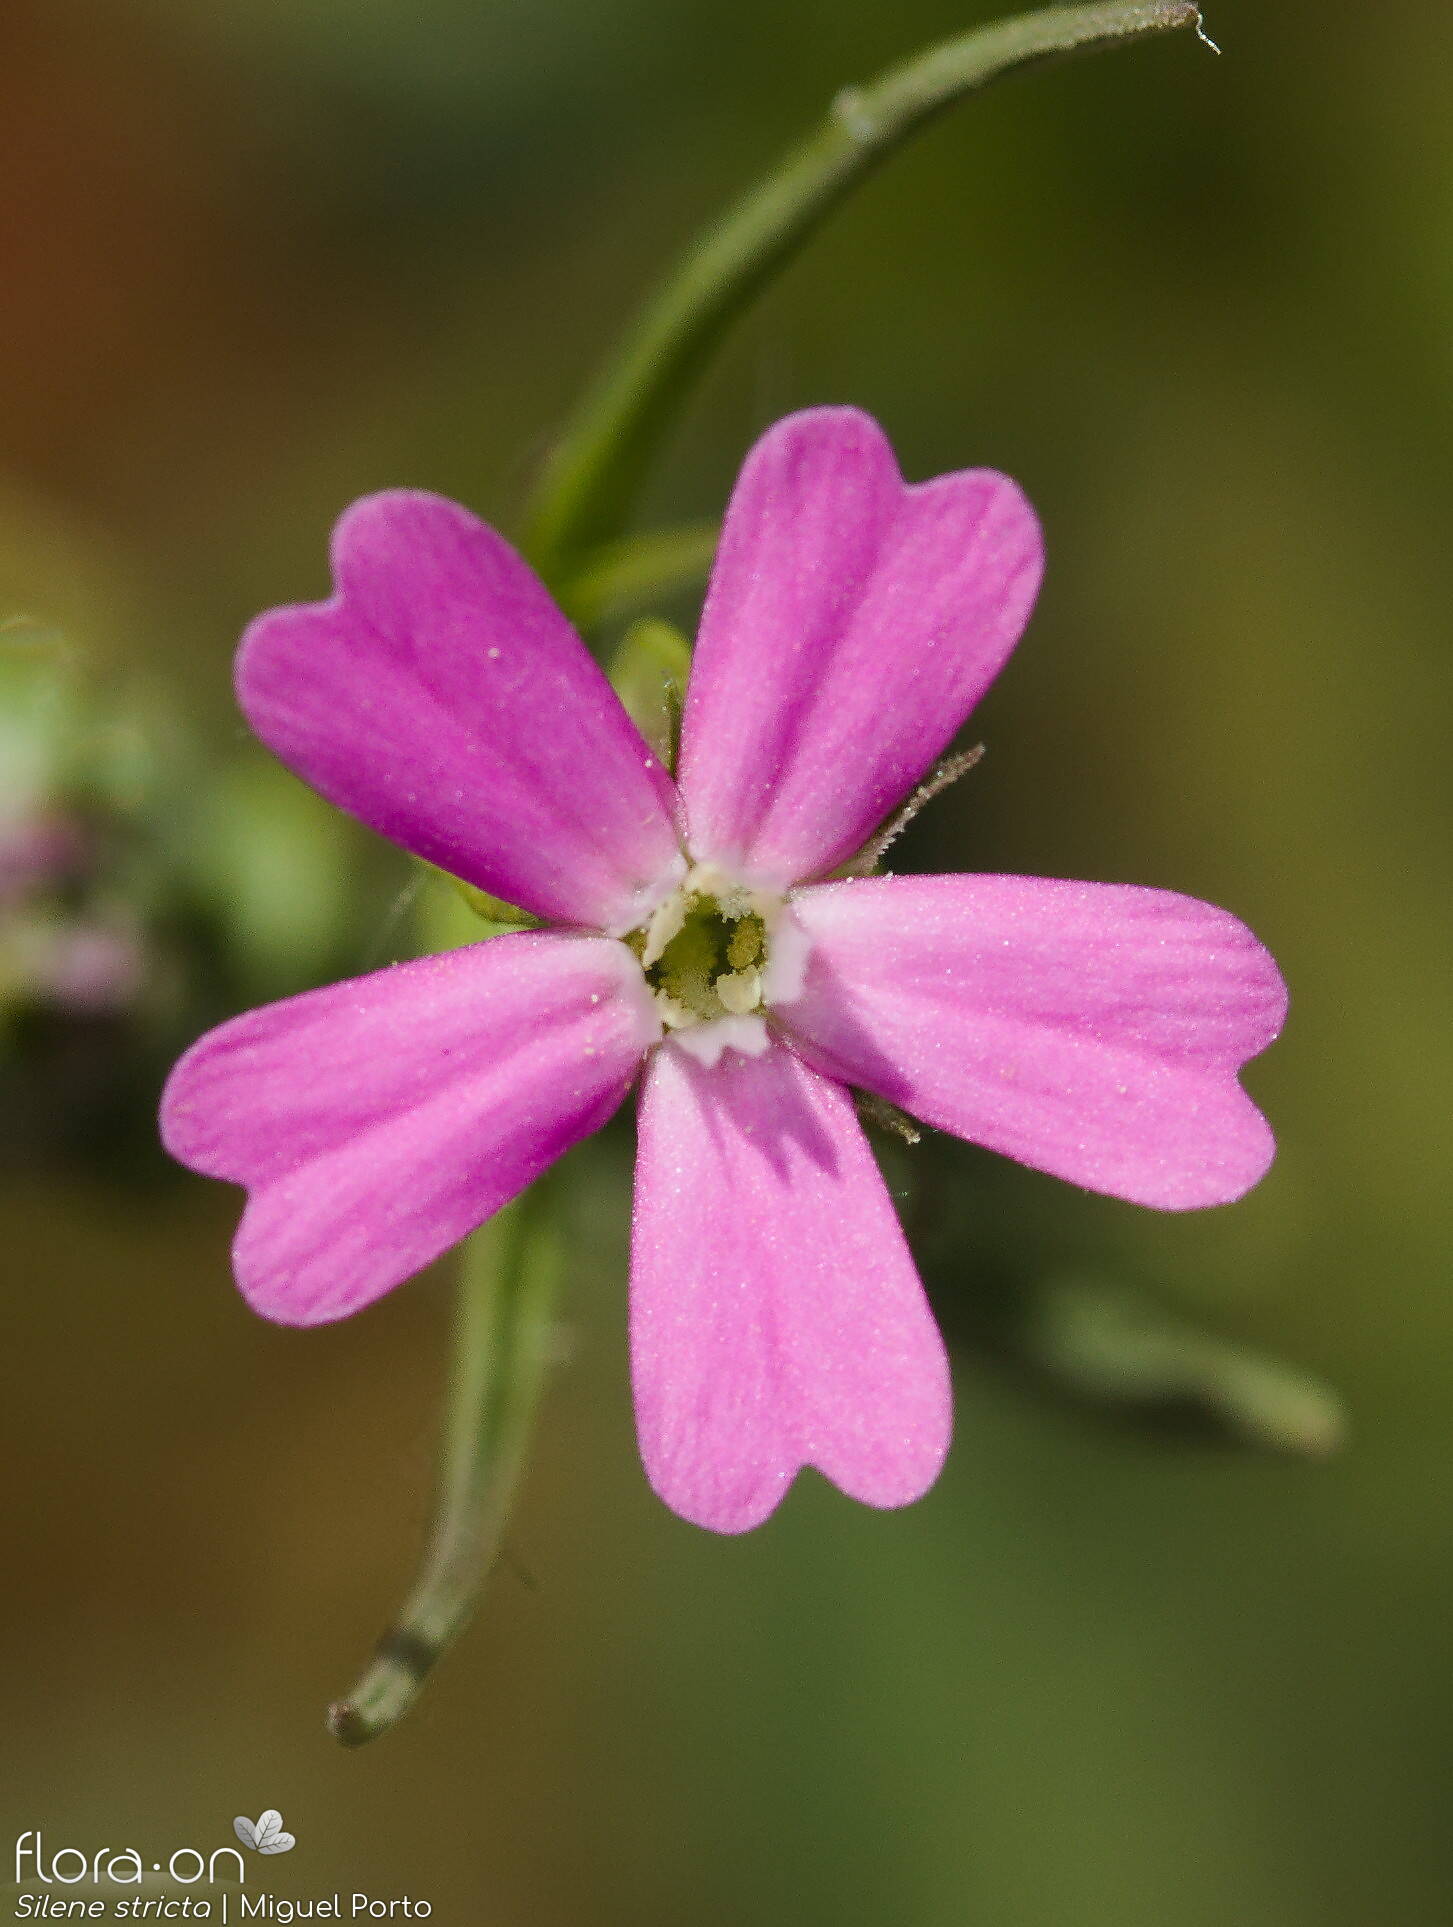 Silene stricta - Flor (close-up) | Miguel Porto; CC BY-NC 4.0